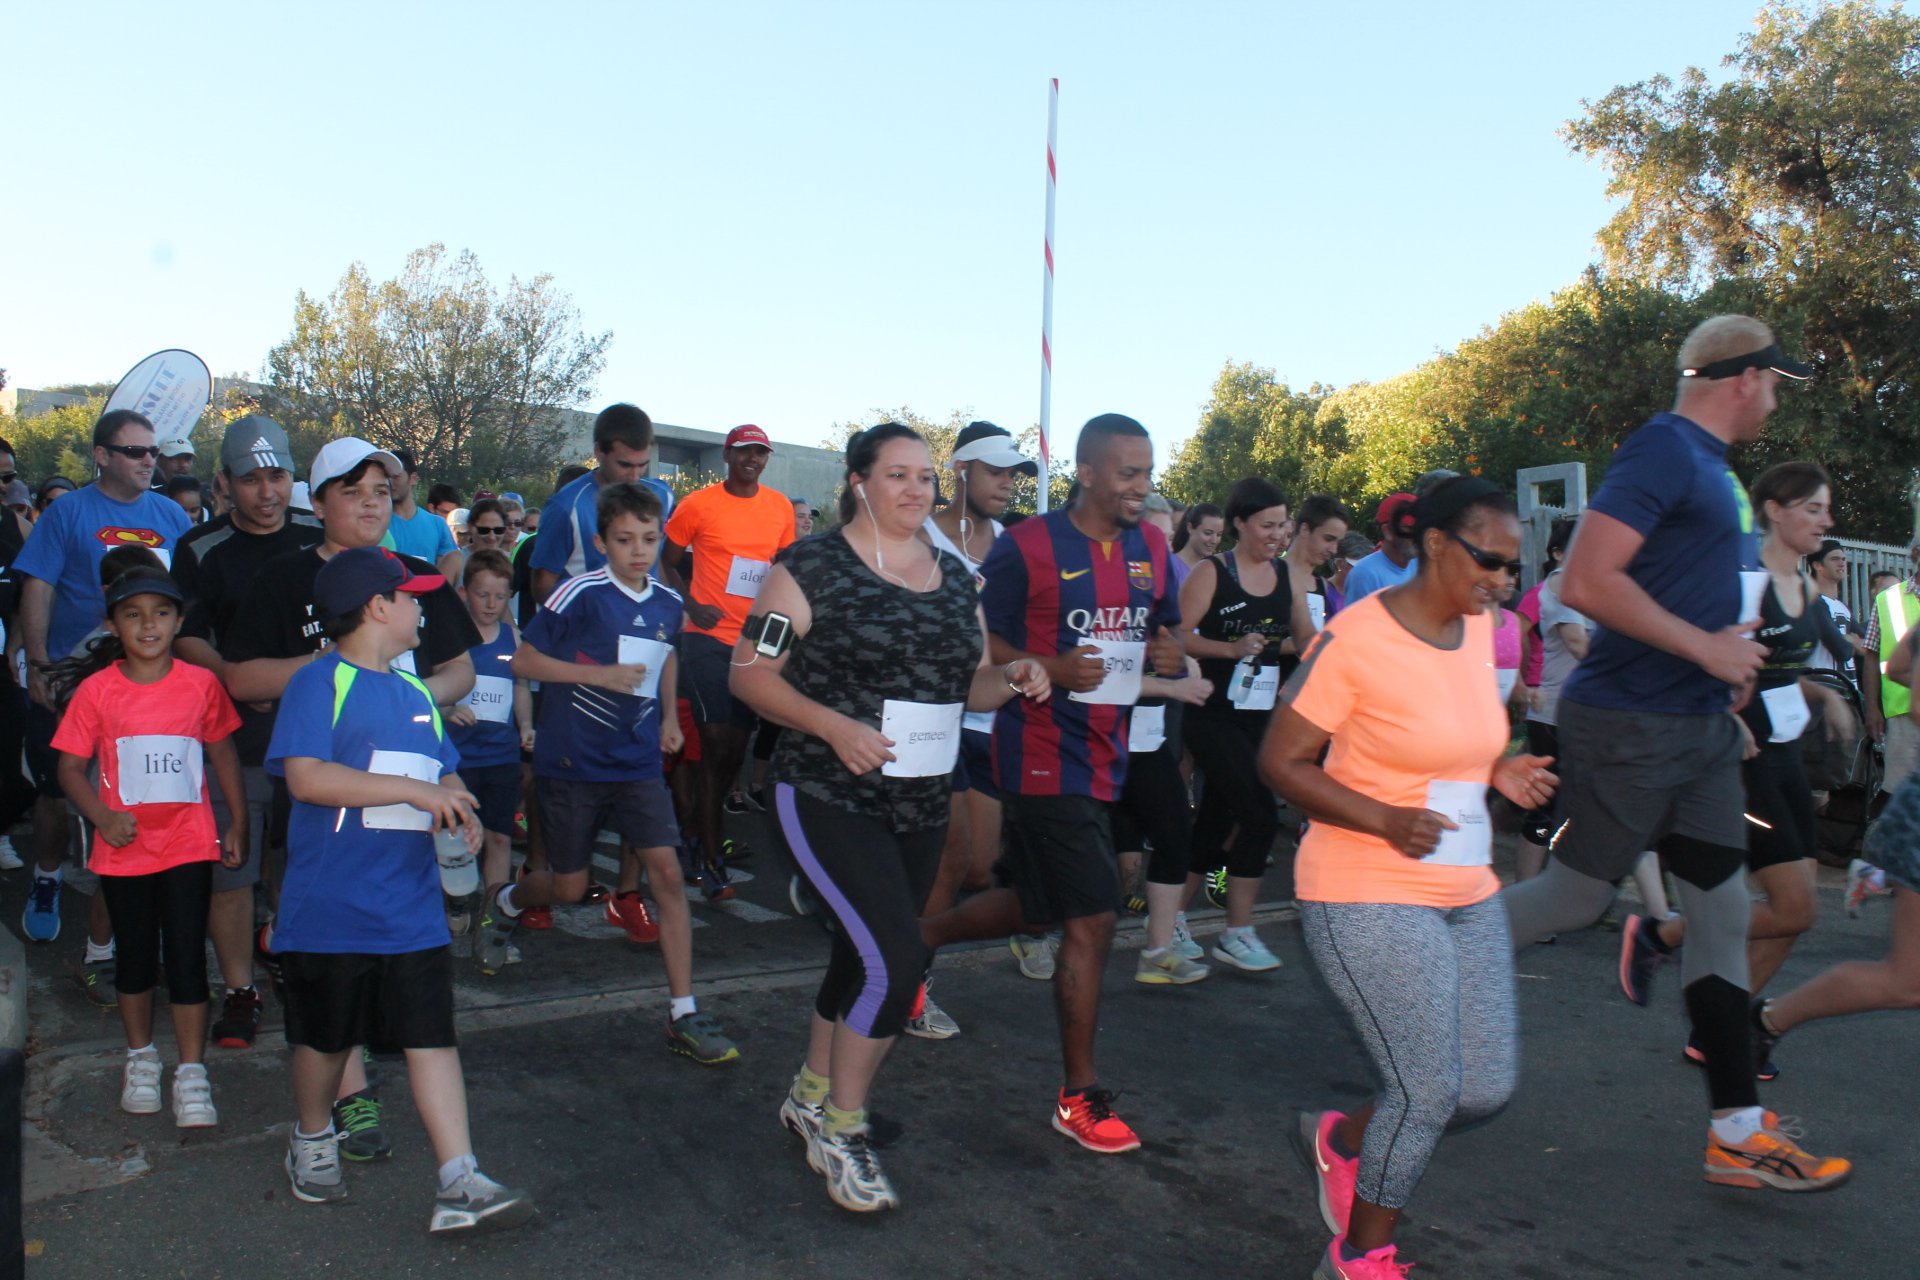 Fun Run above Paarl in aid of children with autism